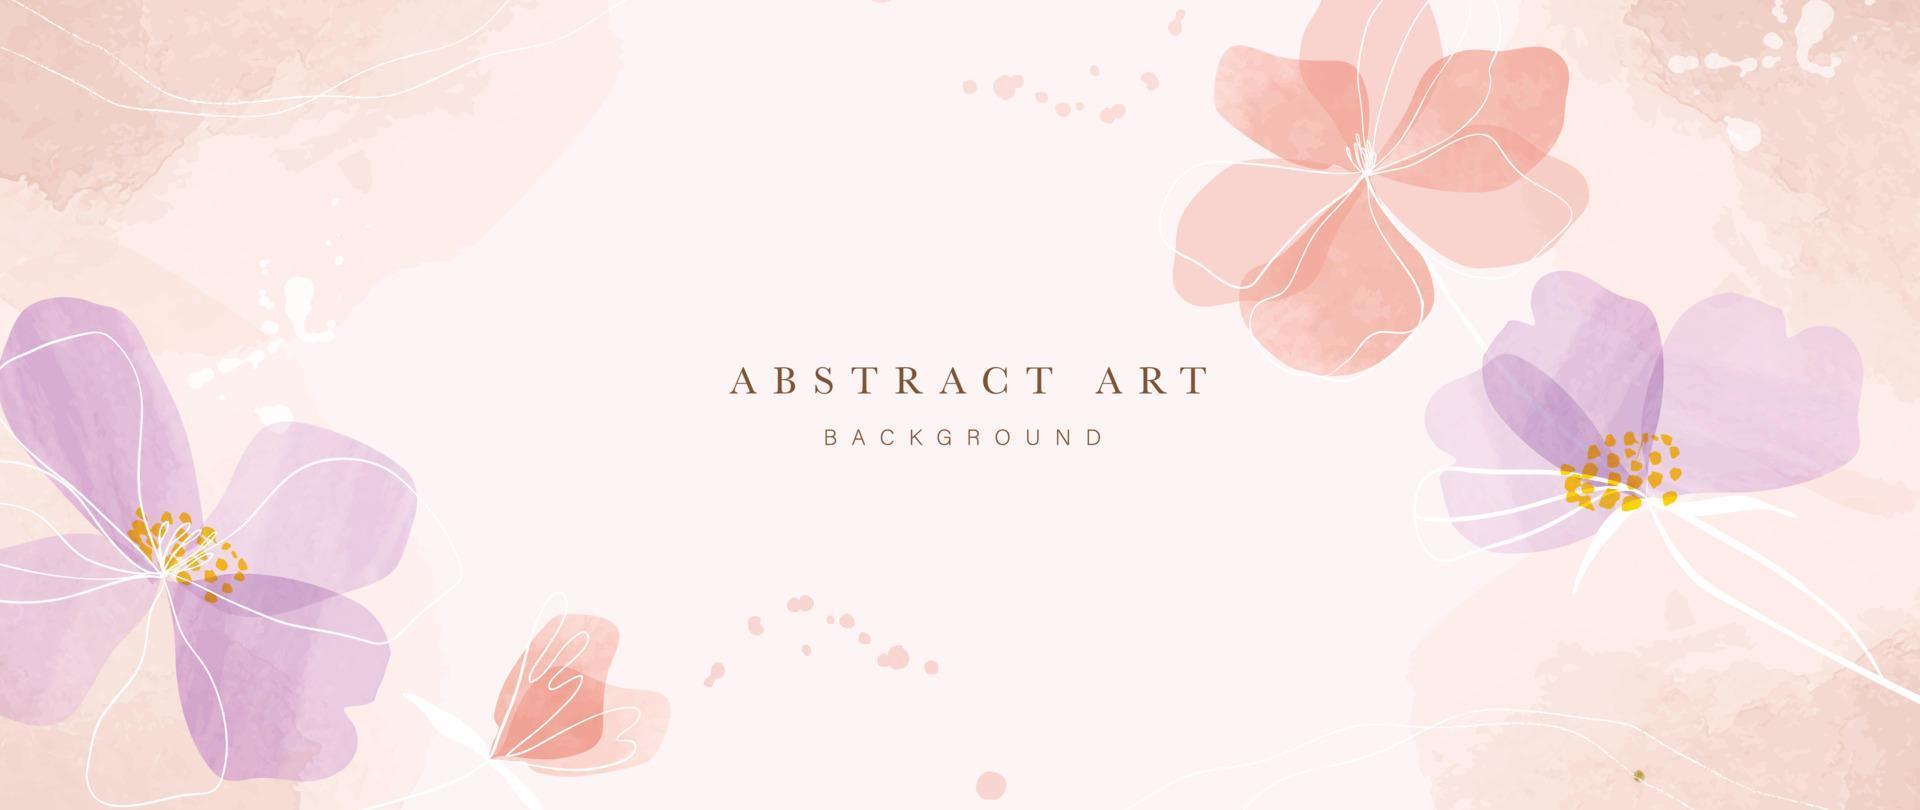 Abstract floral art background vector. Botanical watercolor hand painted pastel color flowers with white line art. Design for wallpaper, banner, print, poster, cover, greeting, invitation card. vector